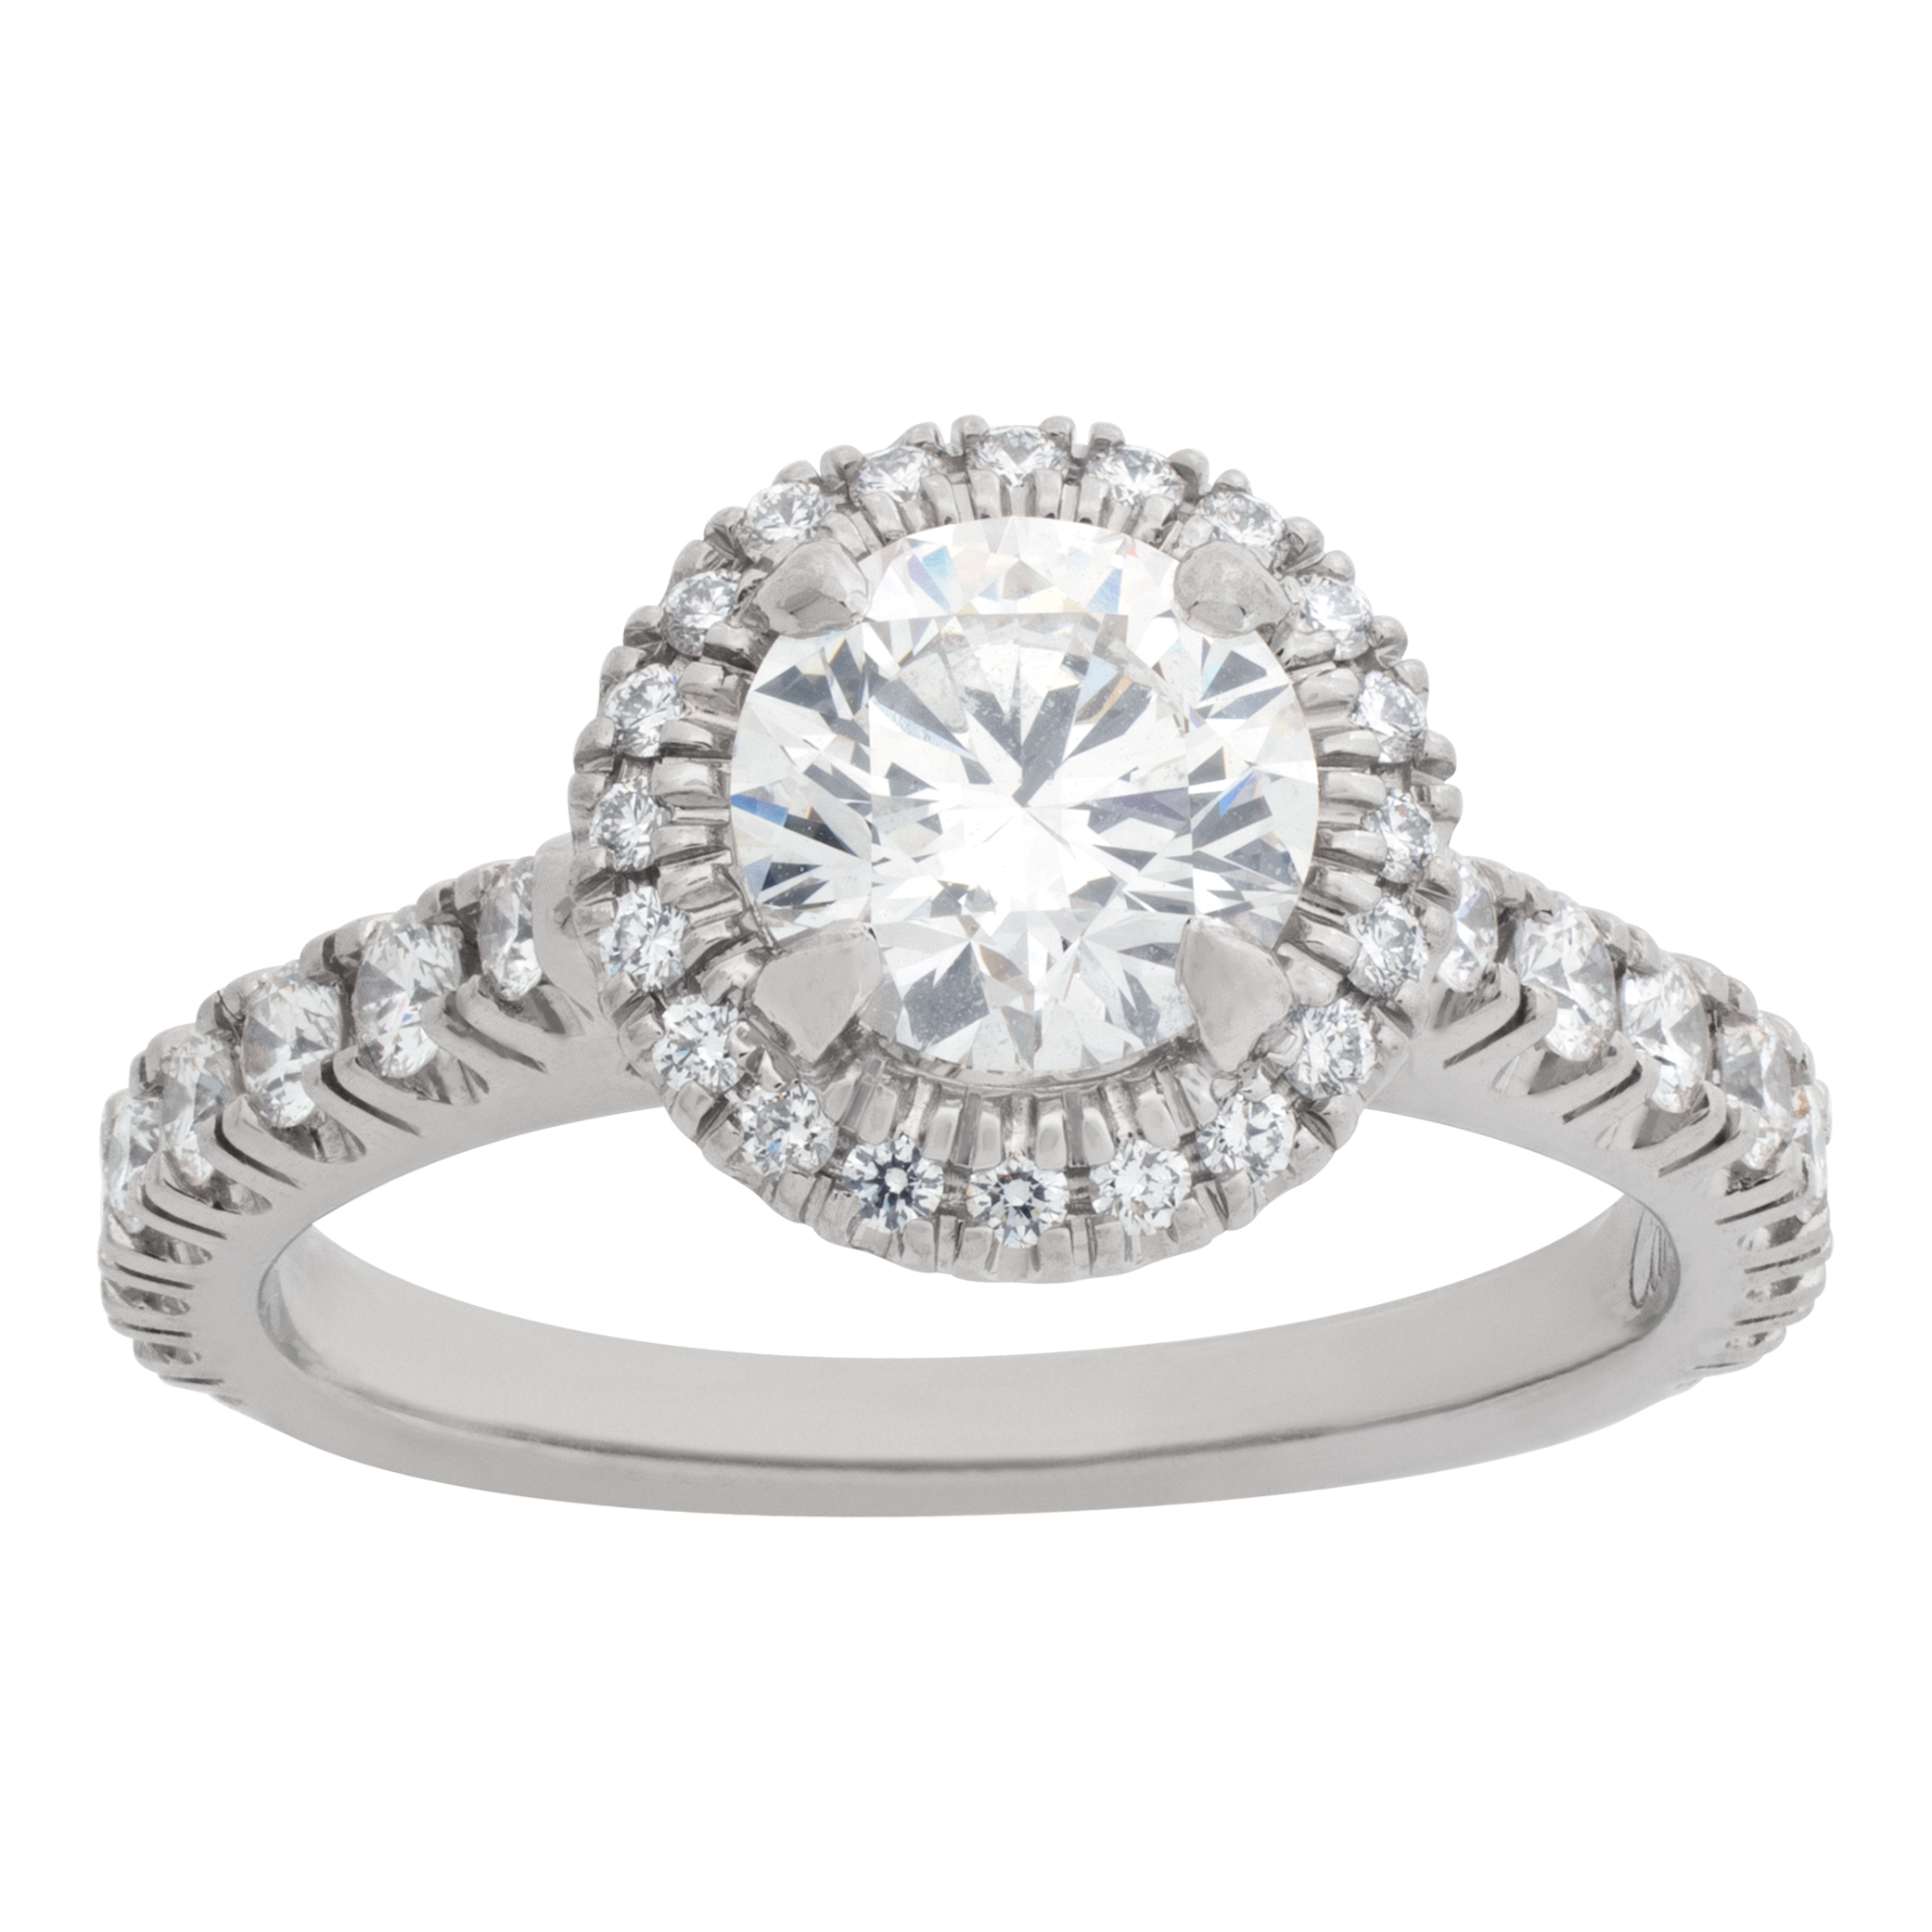 Cartier "Destinee" collection, GIA certified 0.73 caratt full ct round brilliant diamond set in a halo platinum setting.